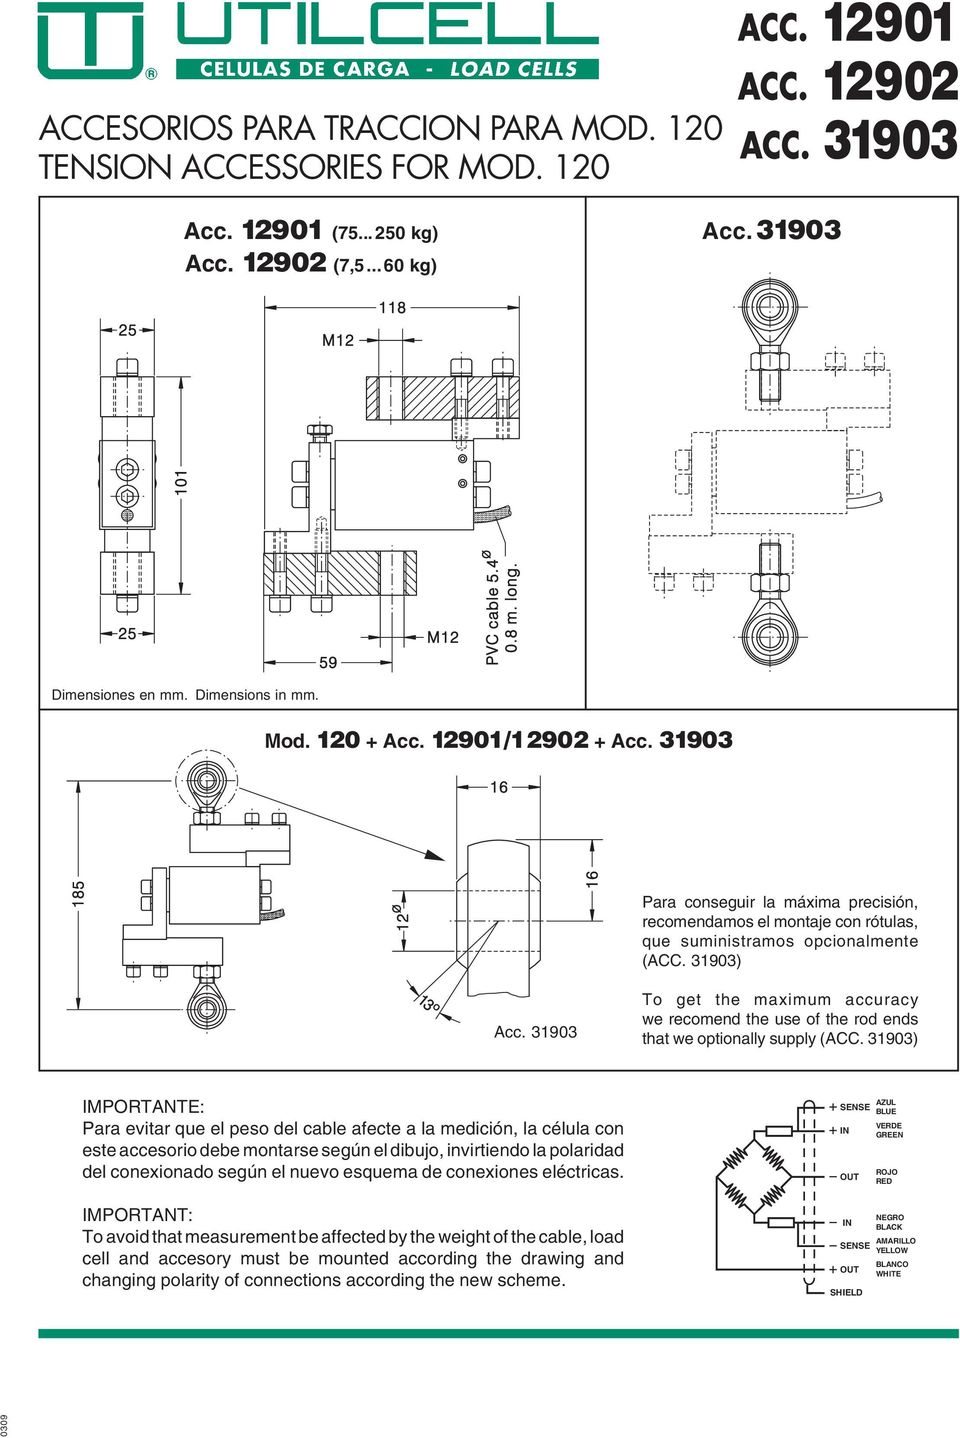 31903 To get the maximum accuracy we recomend the use of the rod ends that we optionally supply (ACC.